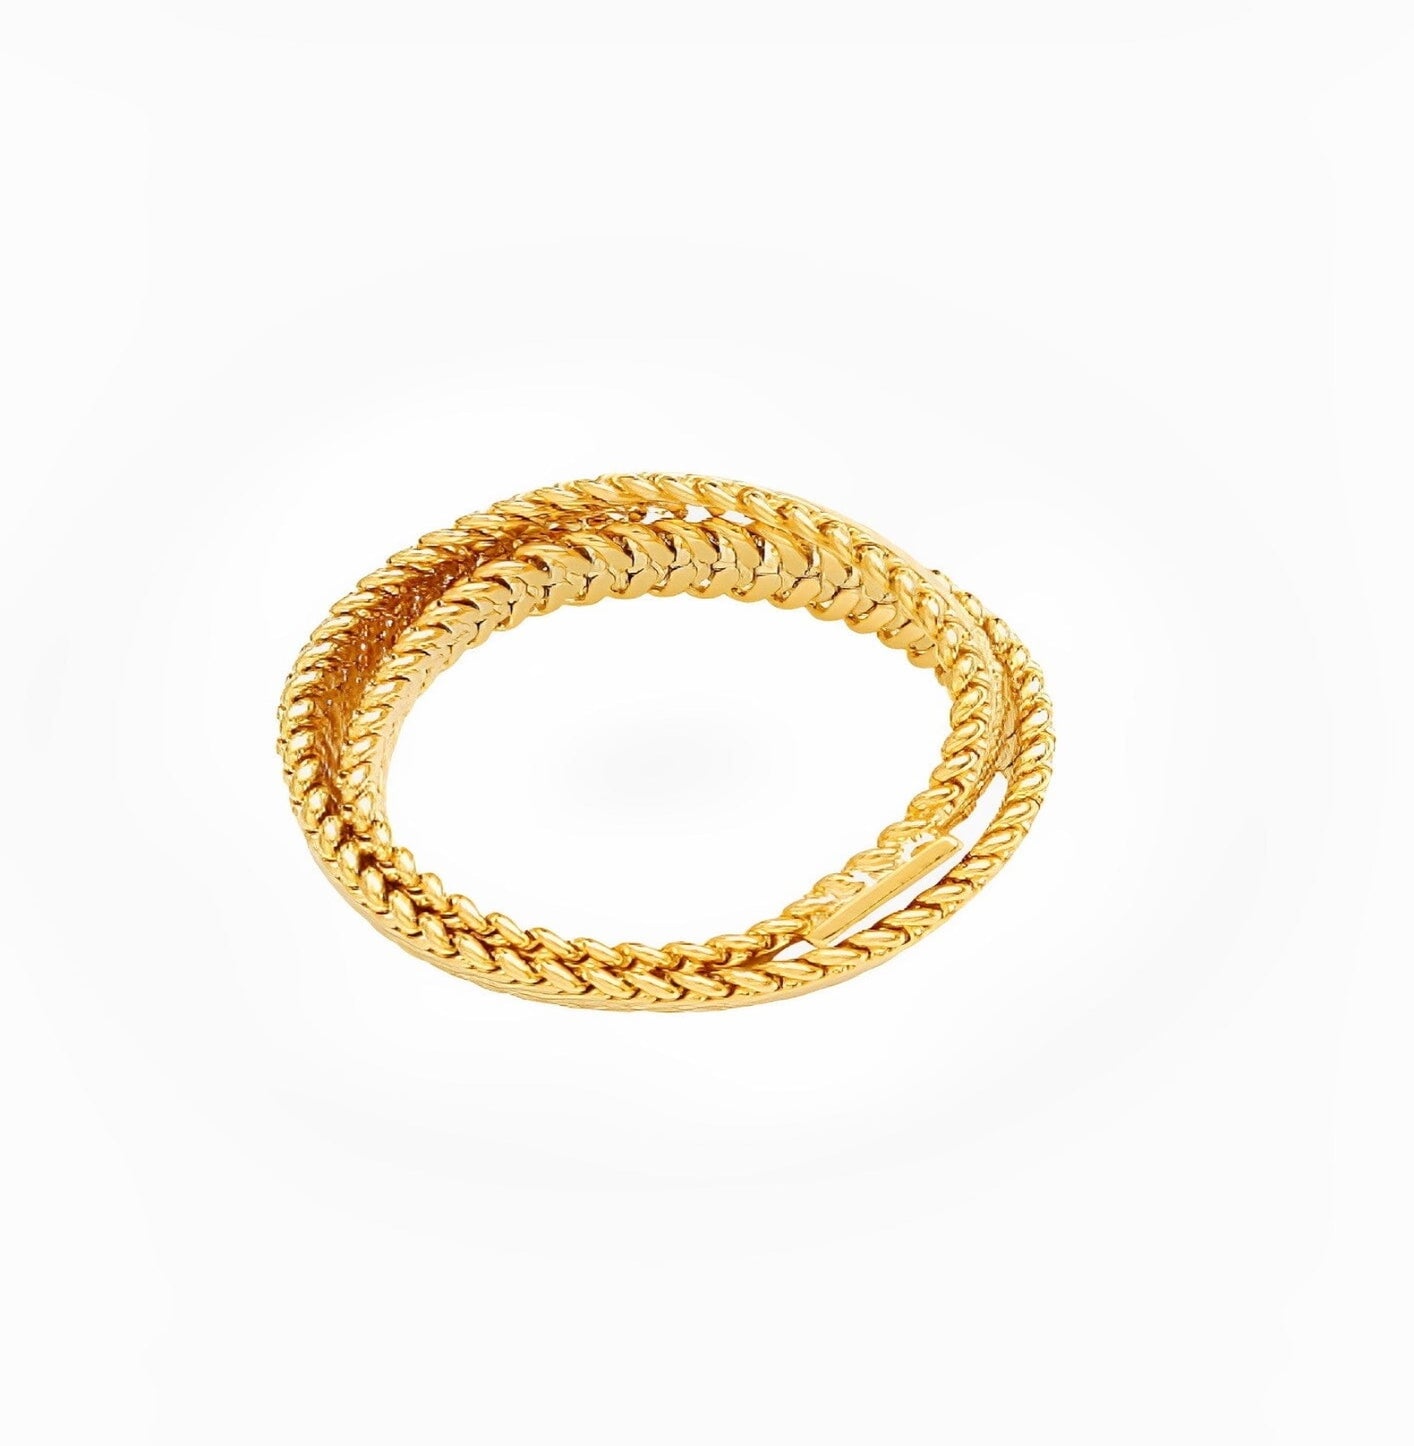 LAZARO RING neck Yubama Jewelry Online Store - The Elegant Designs of Gold and Silver ! 